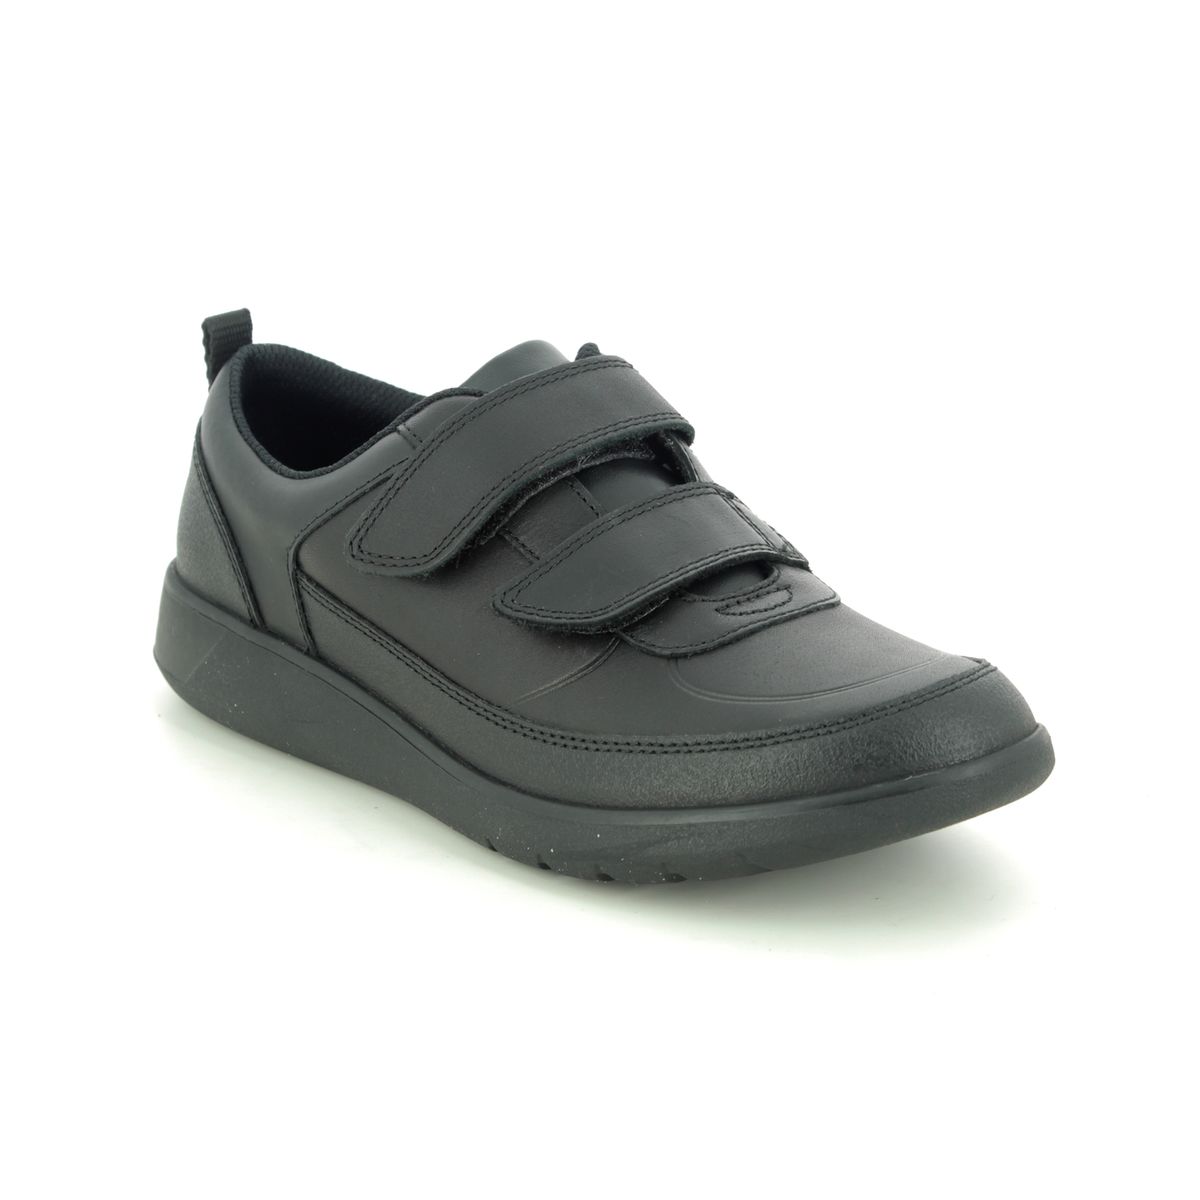 Clarks Scape Flare Y Black Leather Kids Boys Shoes 494098H In Size 4 In Plain Black Leather H Width Fitting Extra Wide For School For kids